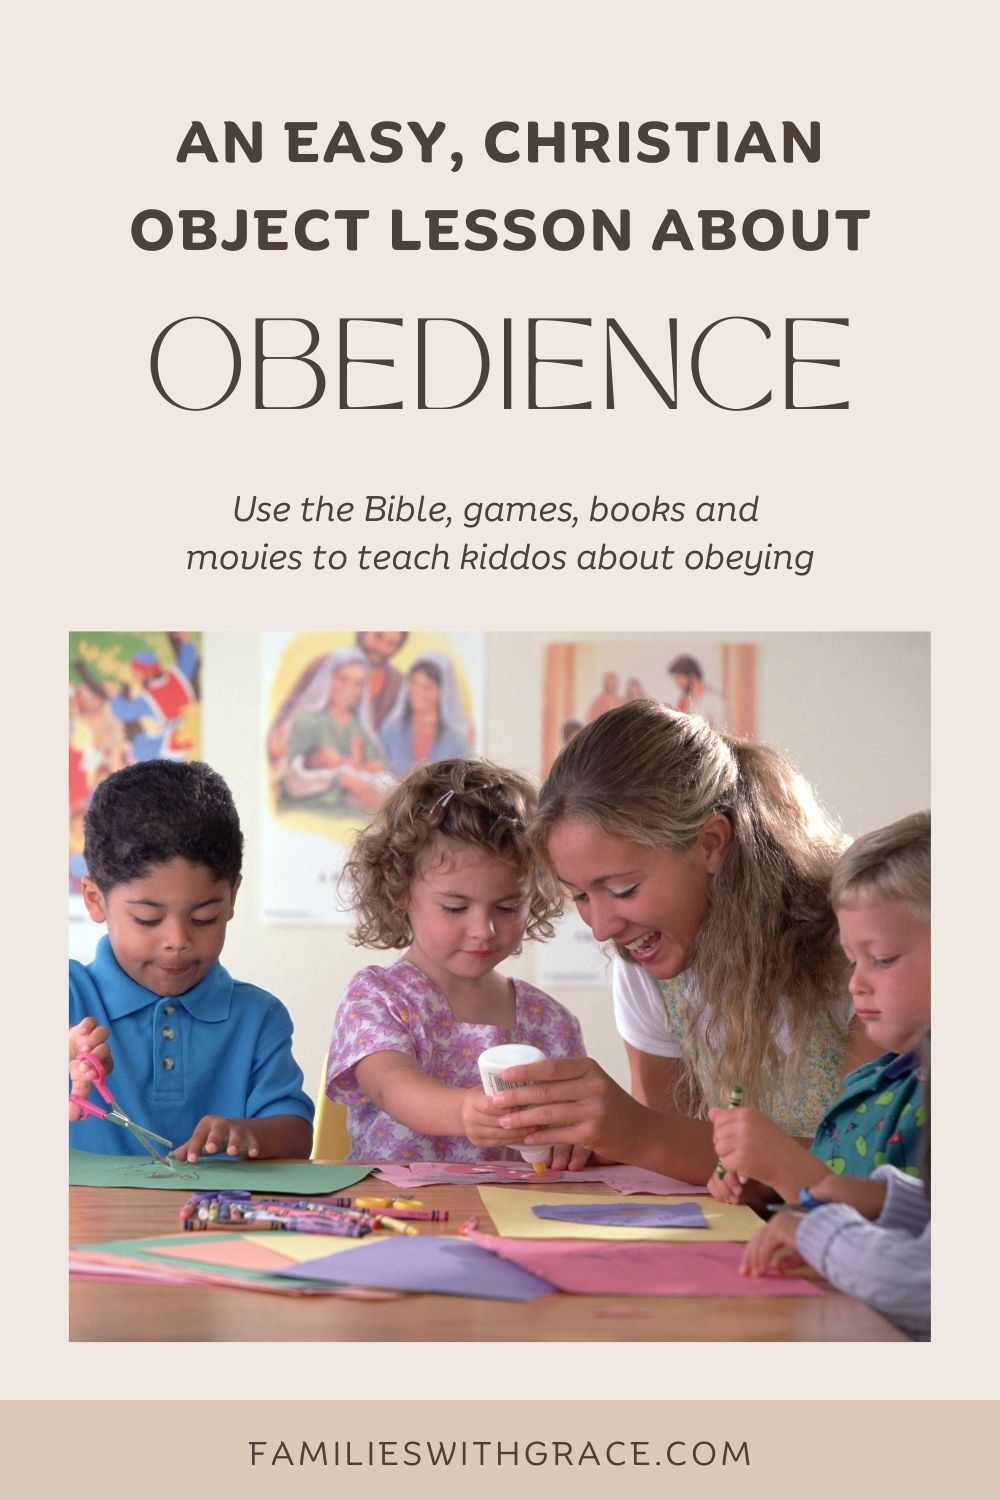 A Christian object lesson about obedience for kids